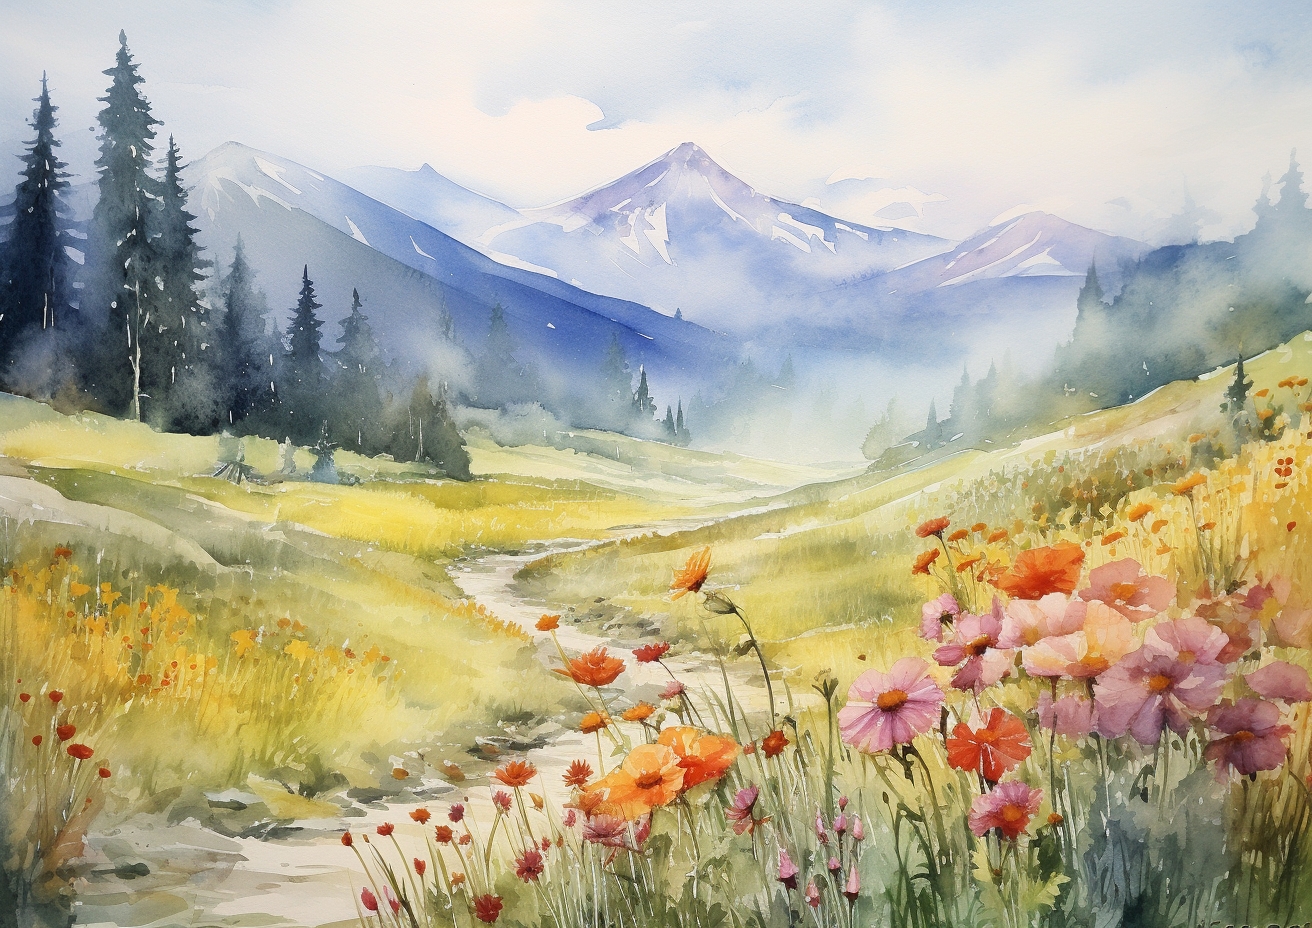 Watercolor painting of an alpine meadow